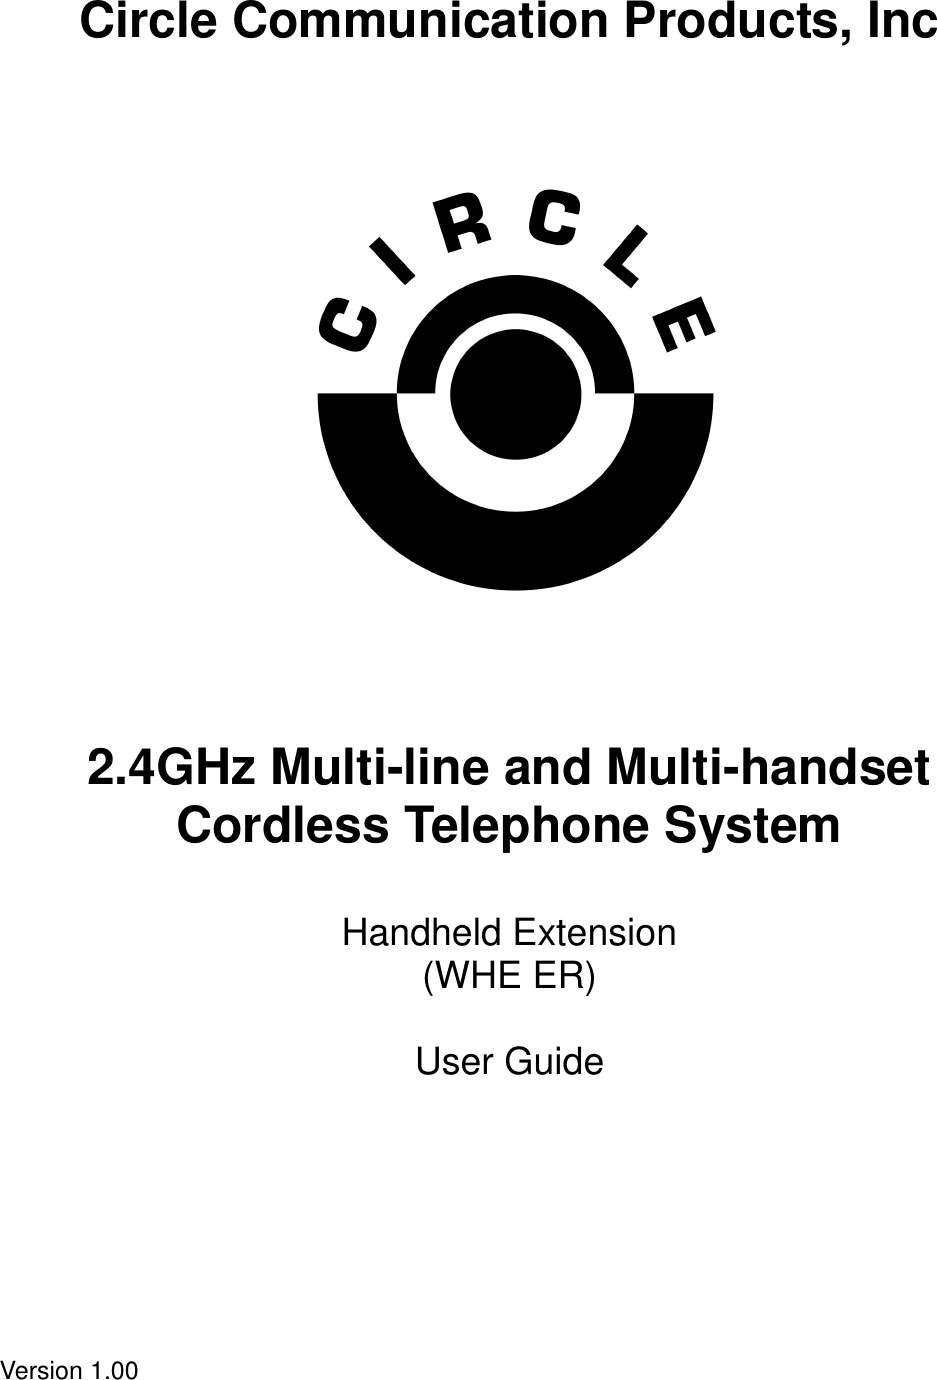  Circle Communication Products, Inc                         2.4GHz Multi-line and Multi-handset   Cordless Telephone System   Handheld Extension (WHE ER)  User Guide          Version 1.00  